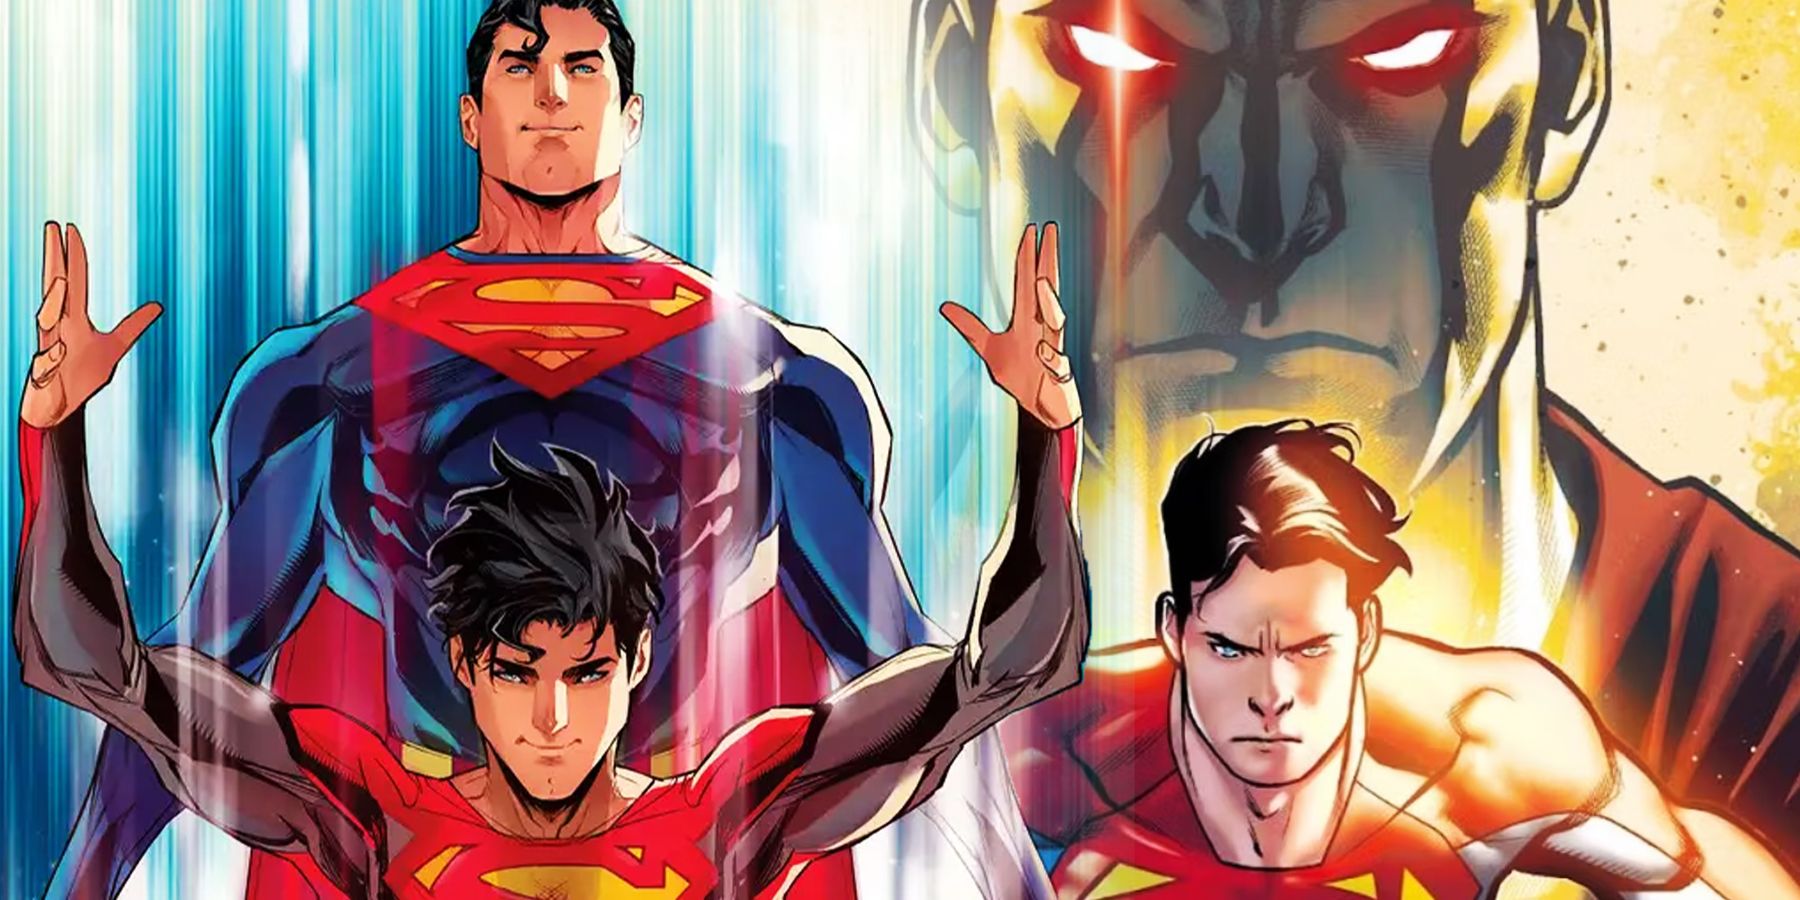 On the left, Jon Kent is seen standing in front of Superman with arms raised. On the right, Jon looks determined with Ultraman's visage glaring in the background.